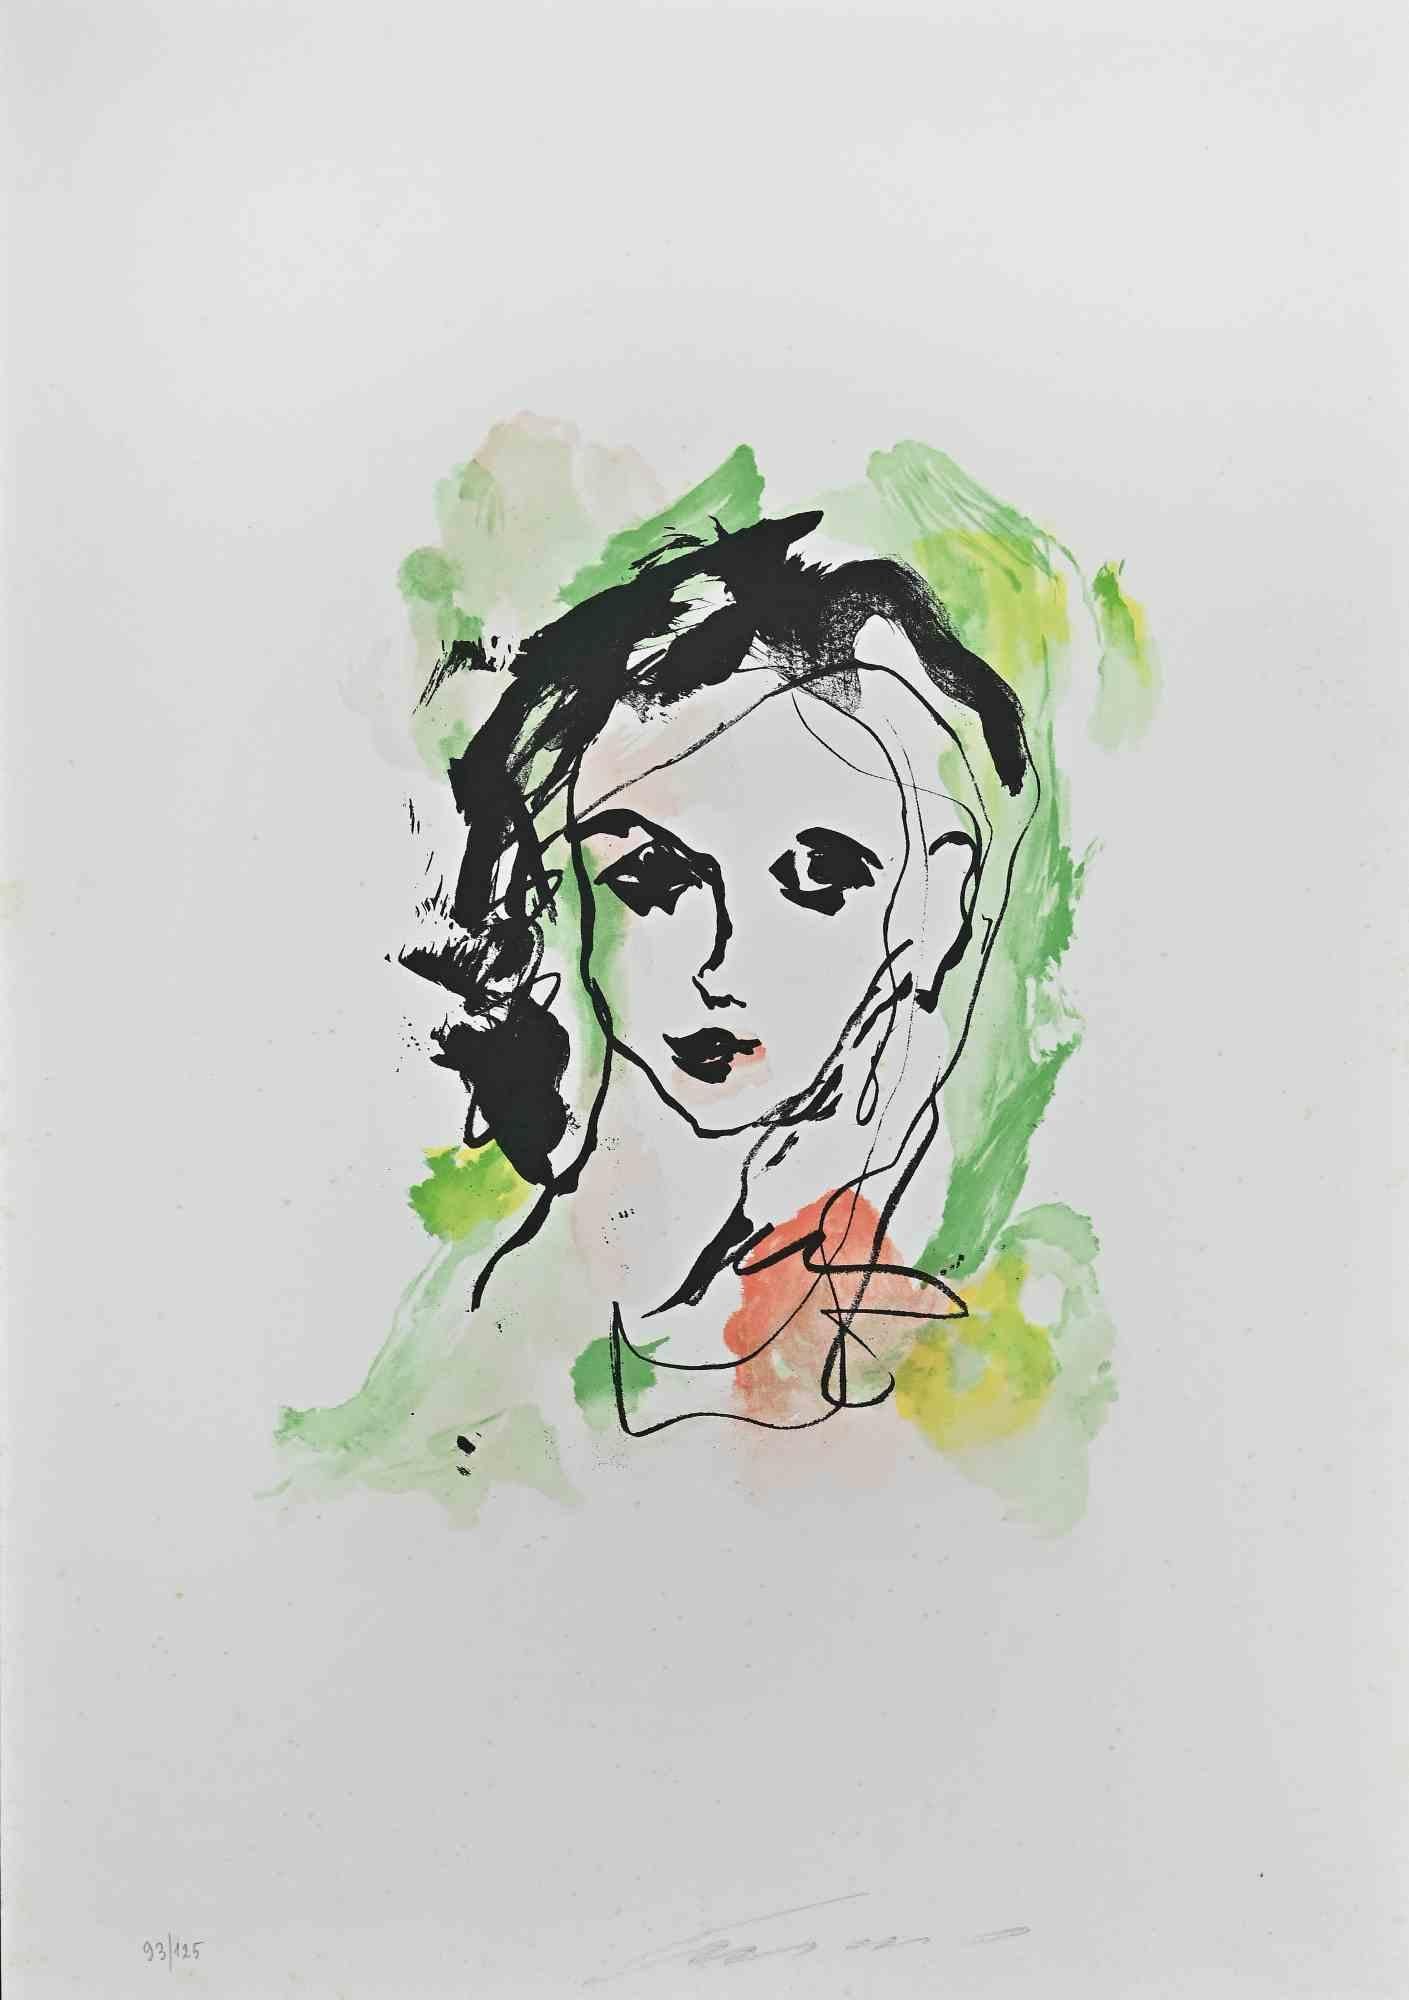 Portrait is a Lithograph realized by Ernesto Treccani in 1973.

Limited edition of 125, editor "La Nuova Foglio SPA".

Very good condition on a white cardboard.

Hand-signed and numbered by the artist with pencil on the lower margin.

Ernesto